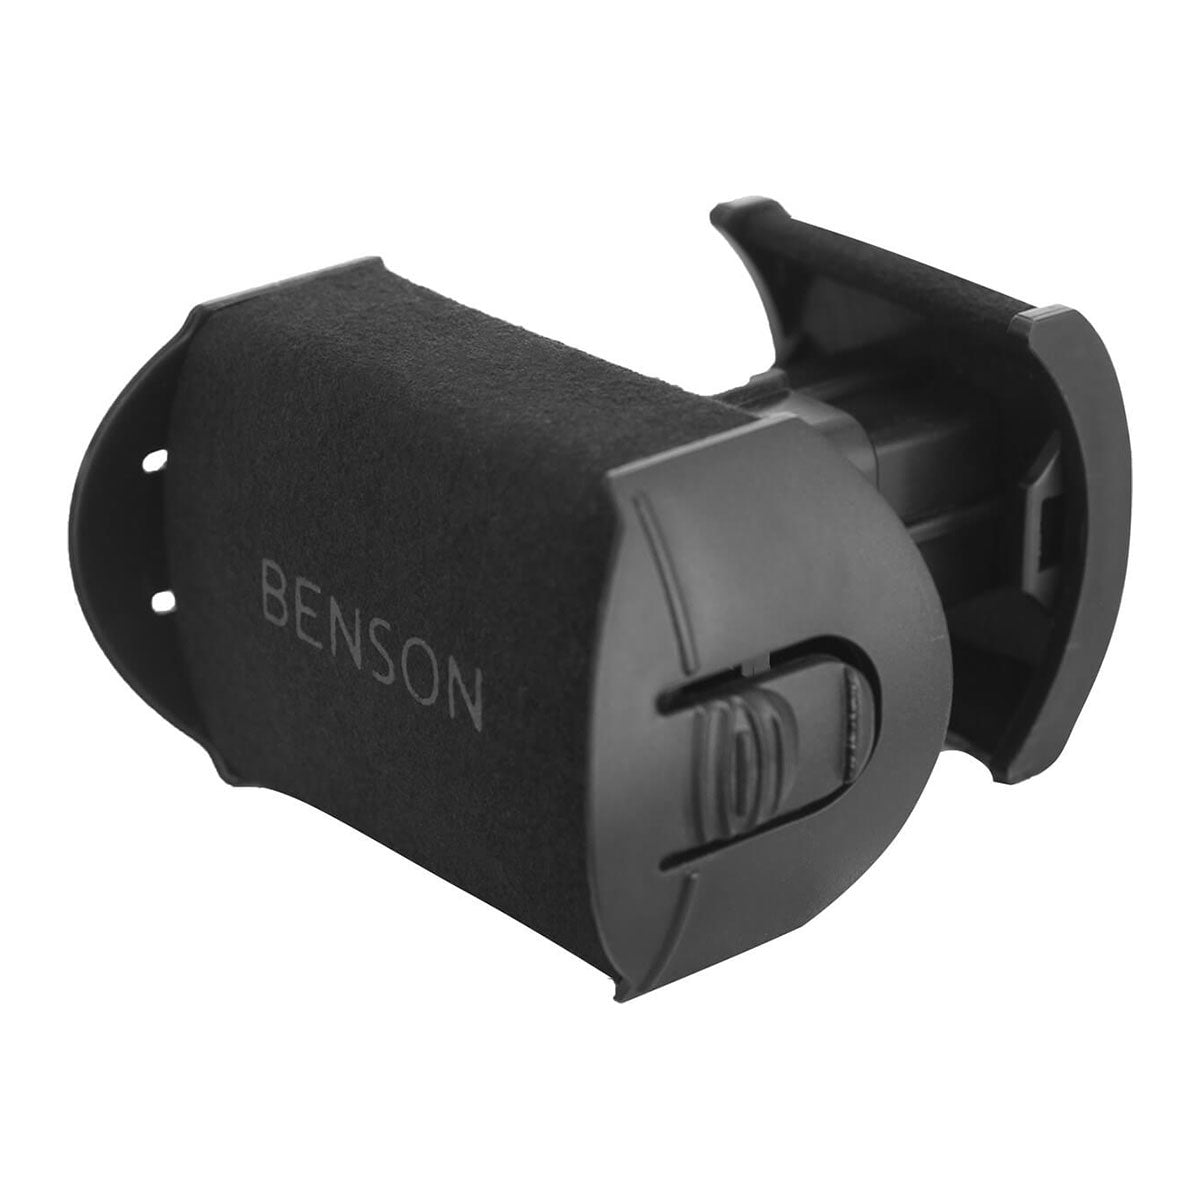 Benson Compact Double - Watchwinder for 2 watches